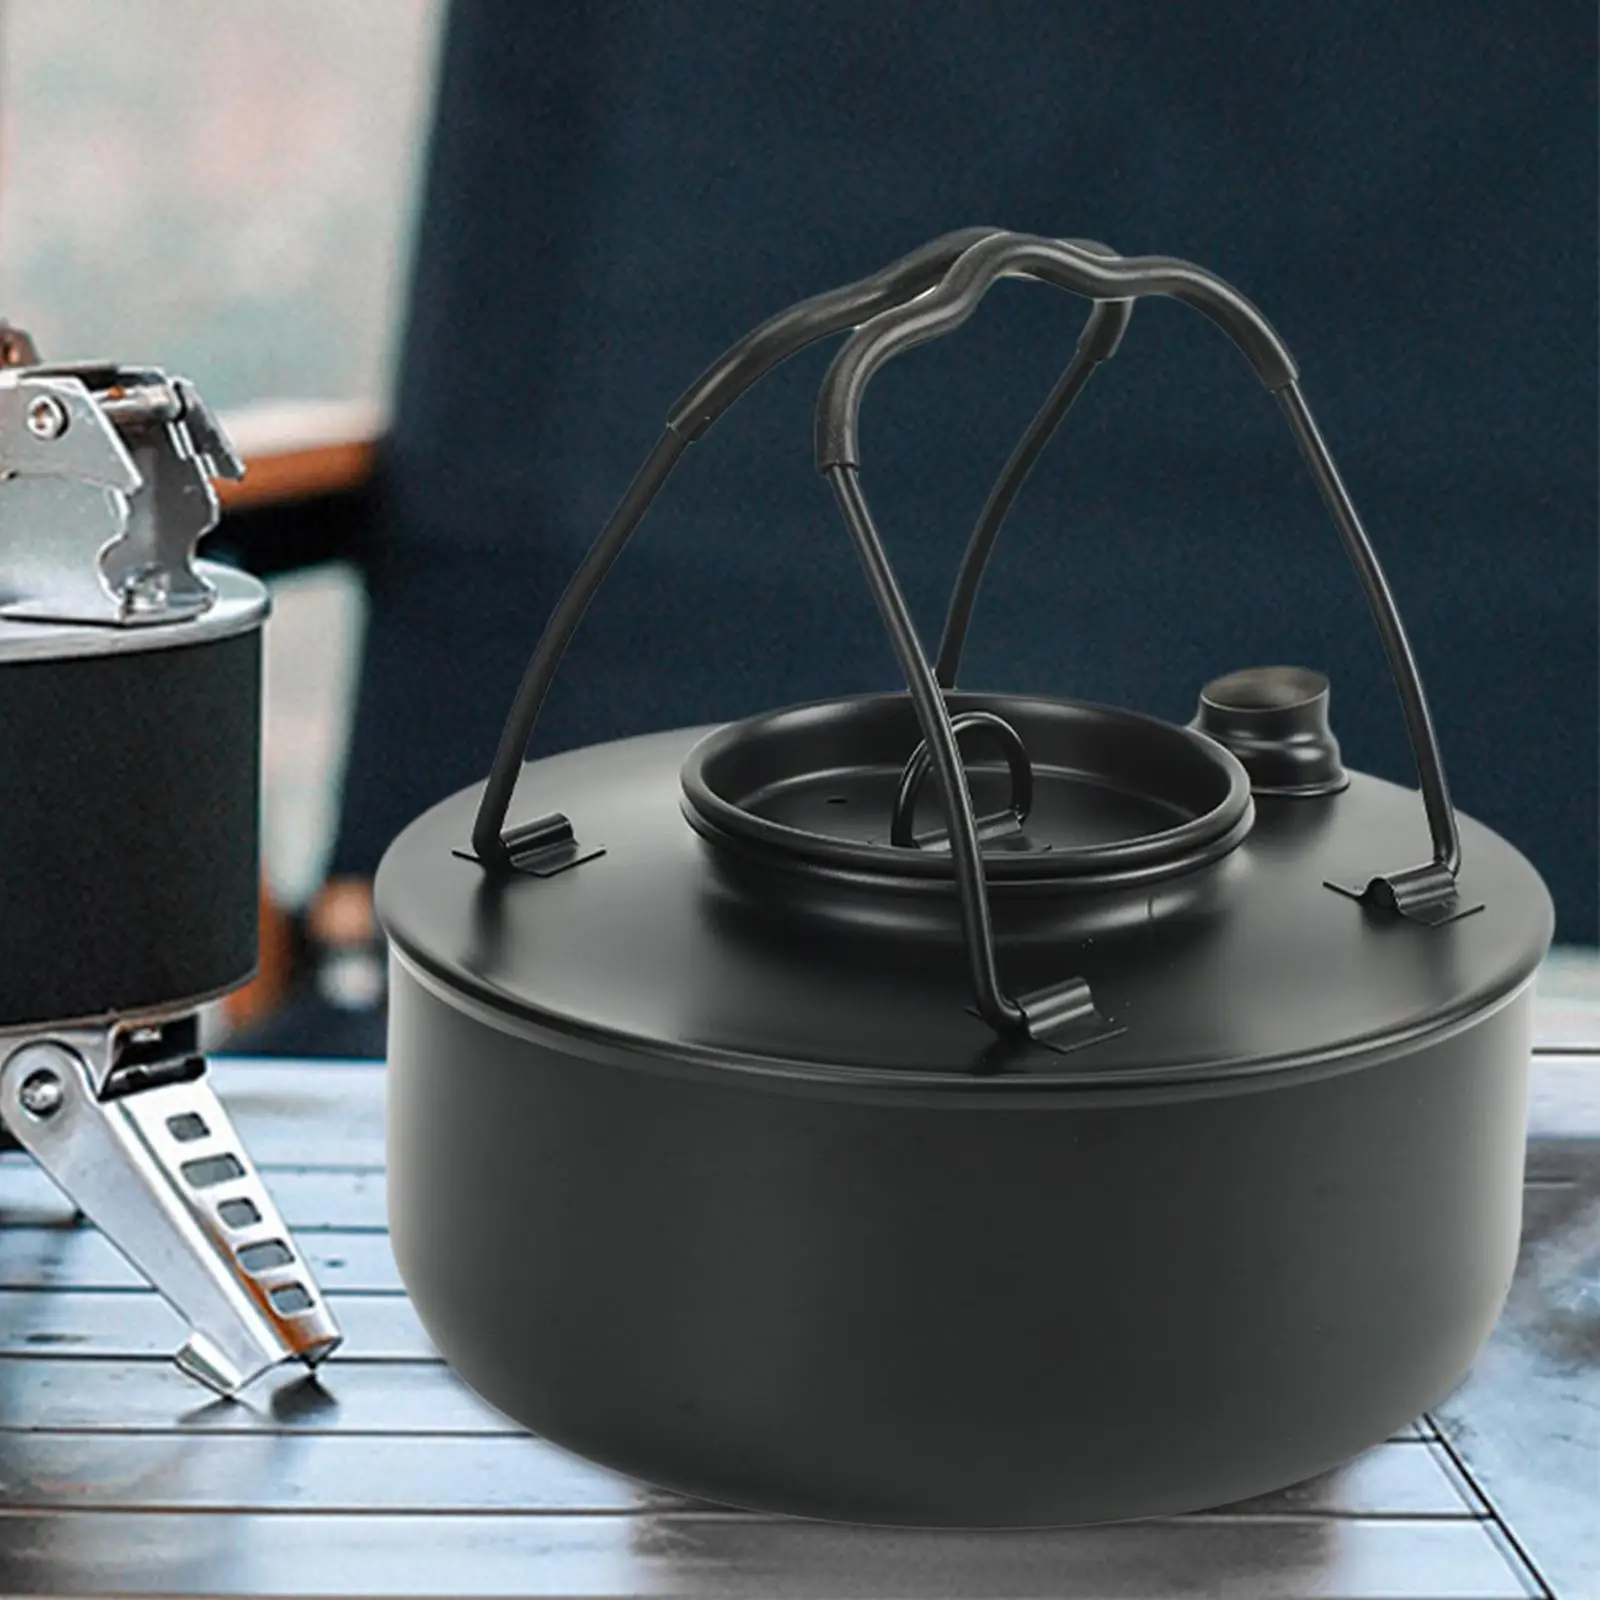 Portable Camping Kettle Teapot Hiking Teakettle Backpack Fishing Outdoor Stove Pot for Tea Coffee Cooking Boiling Water Kitchen